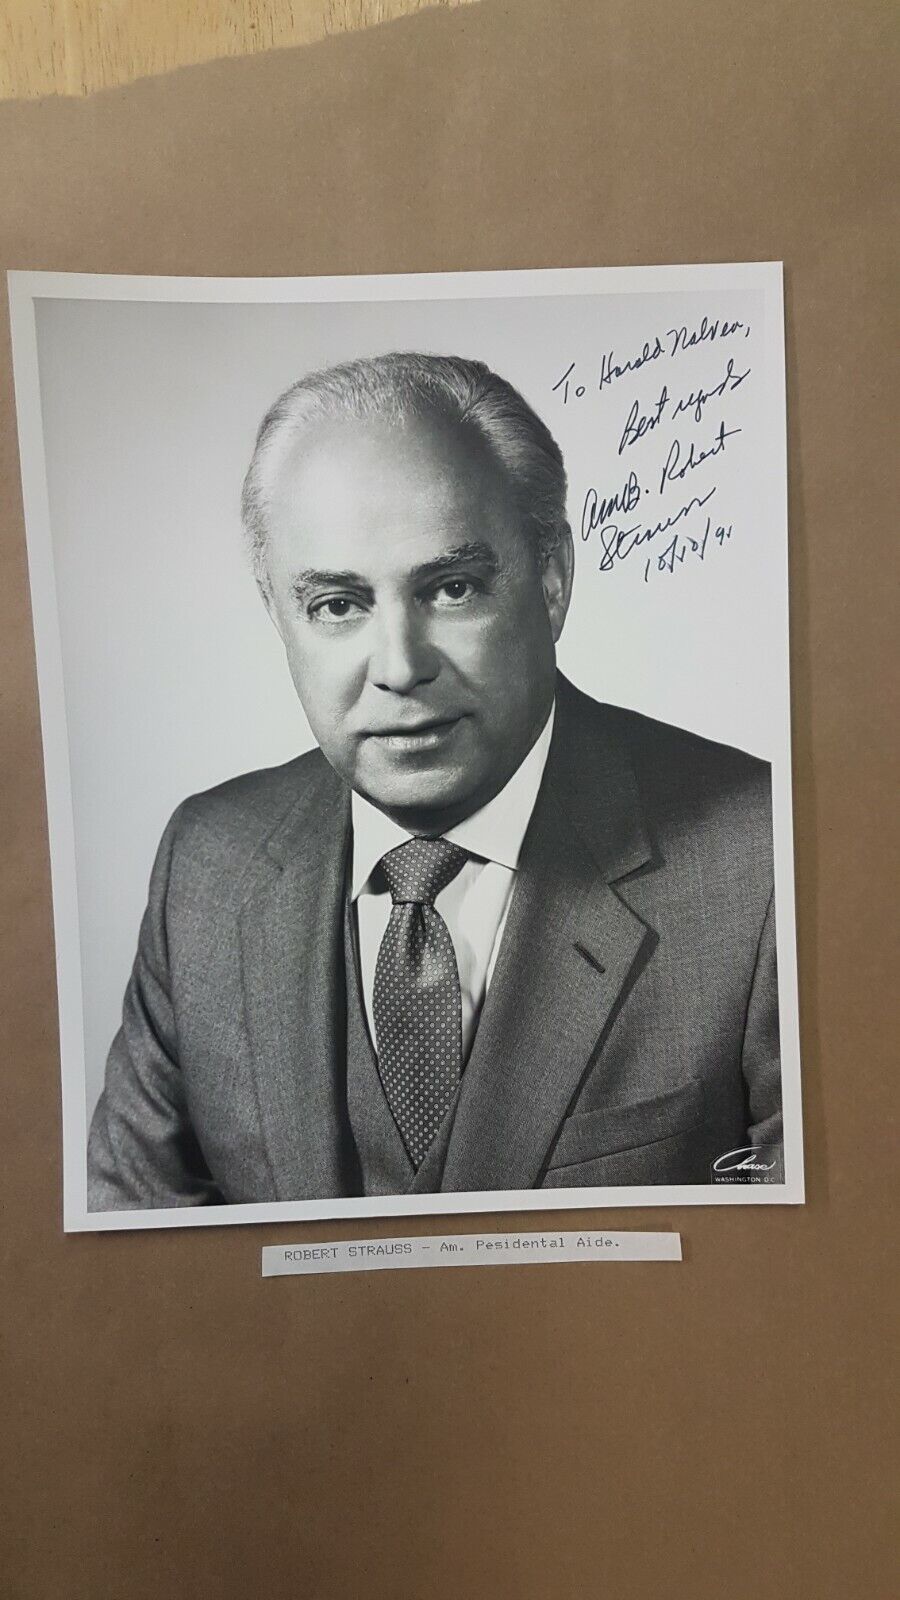 Robert Strauss Autographed Photo 8x10 Politics Politician President Aide signed